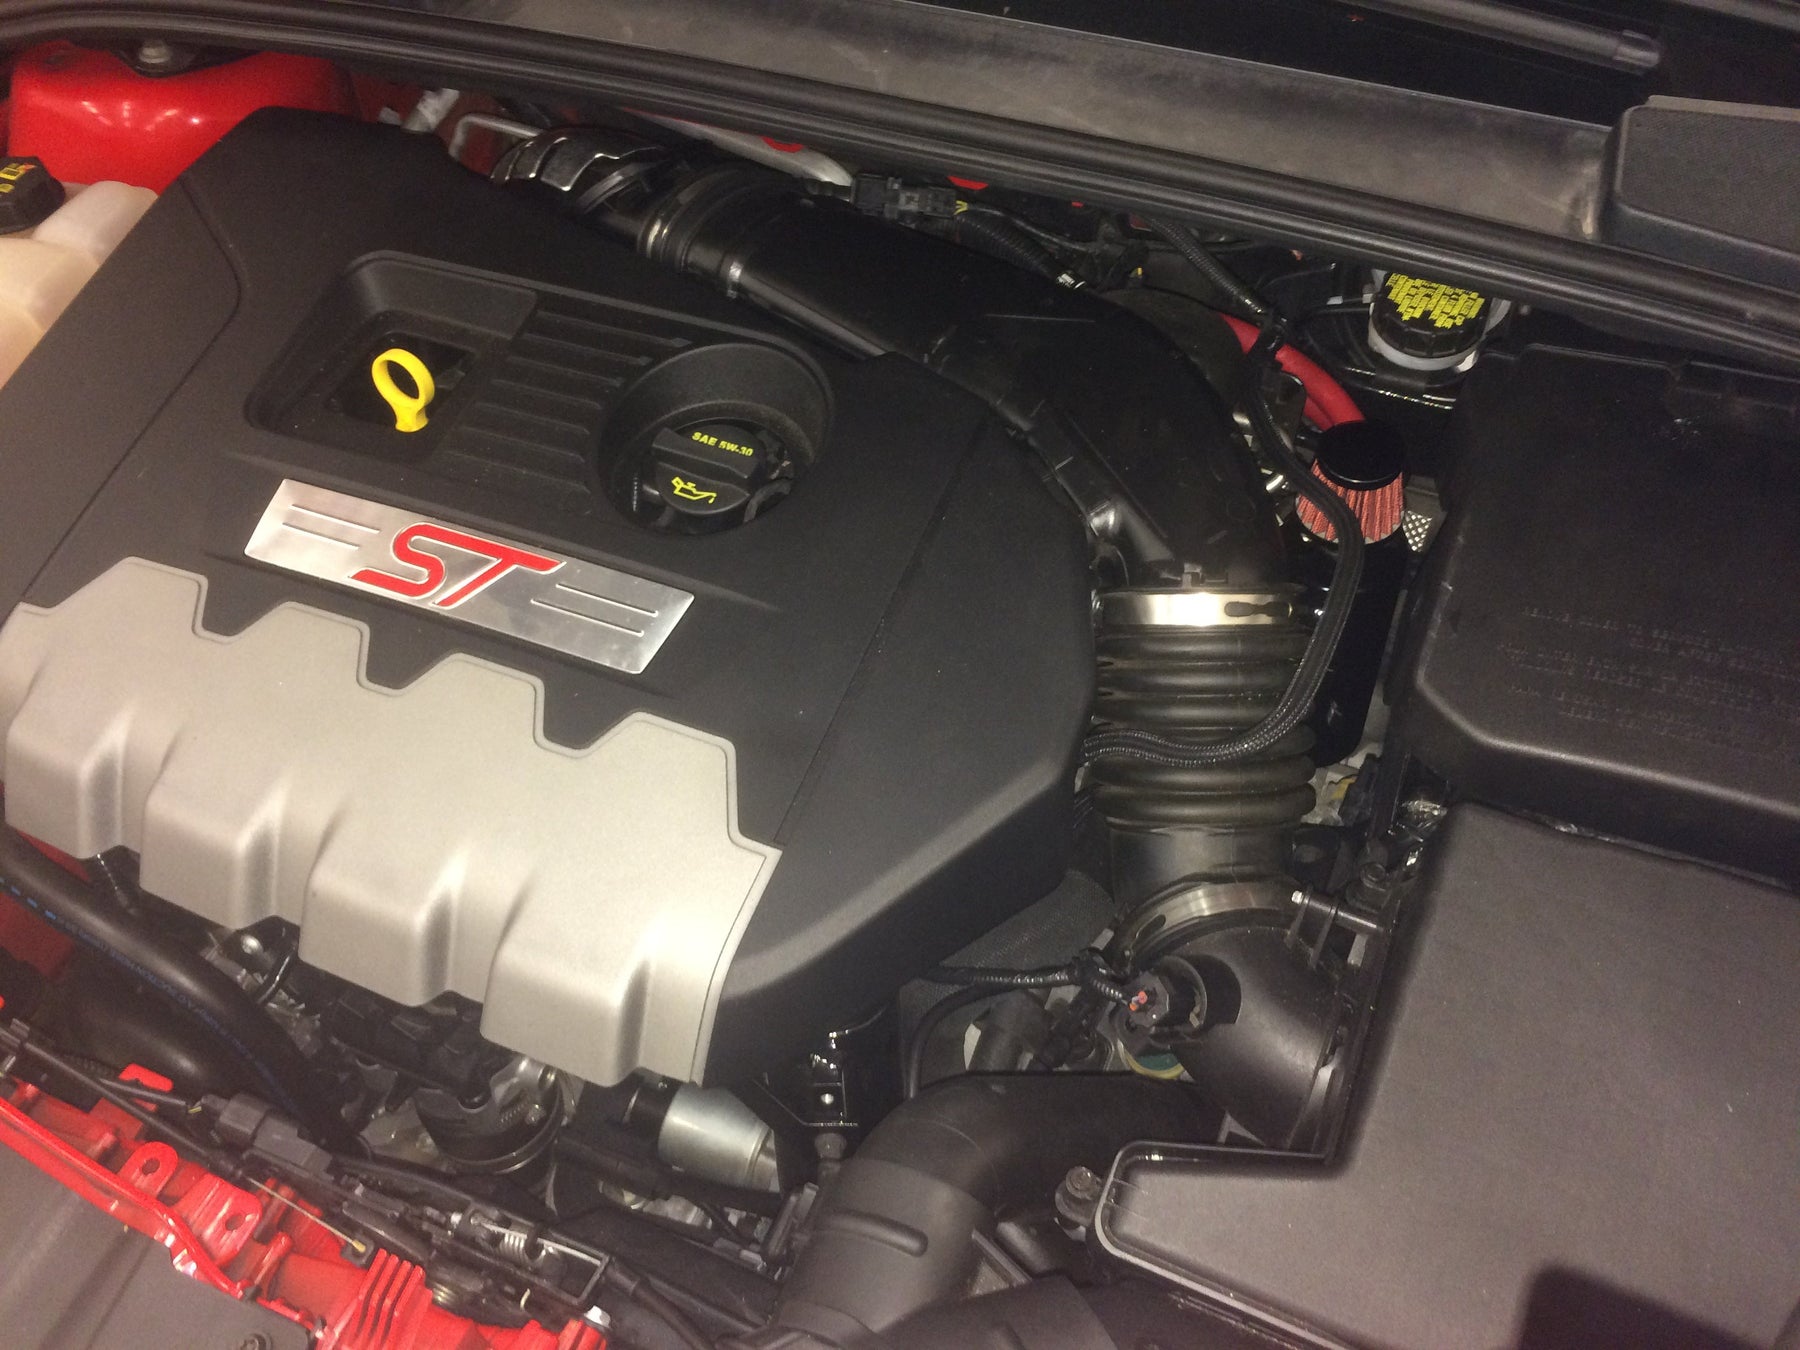 Guides-Damond Motorsports Focus ST Stage 2 Install Guide